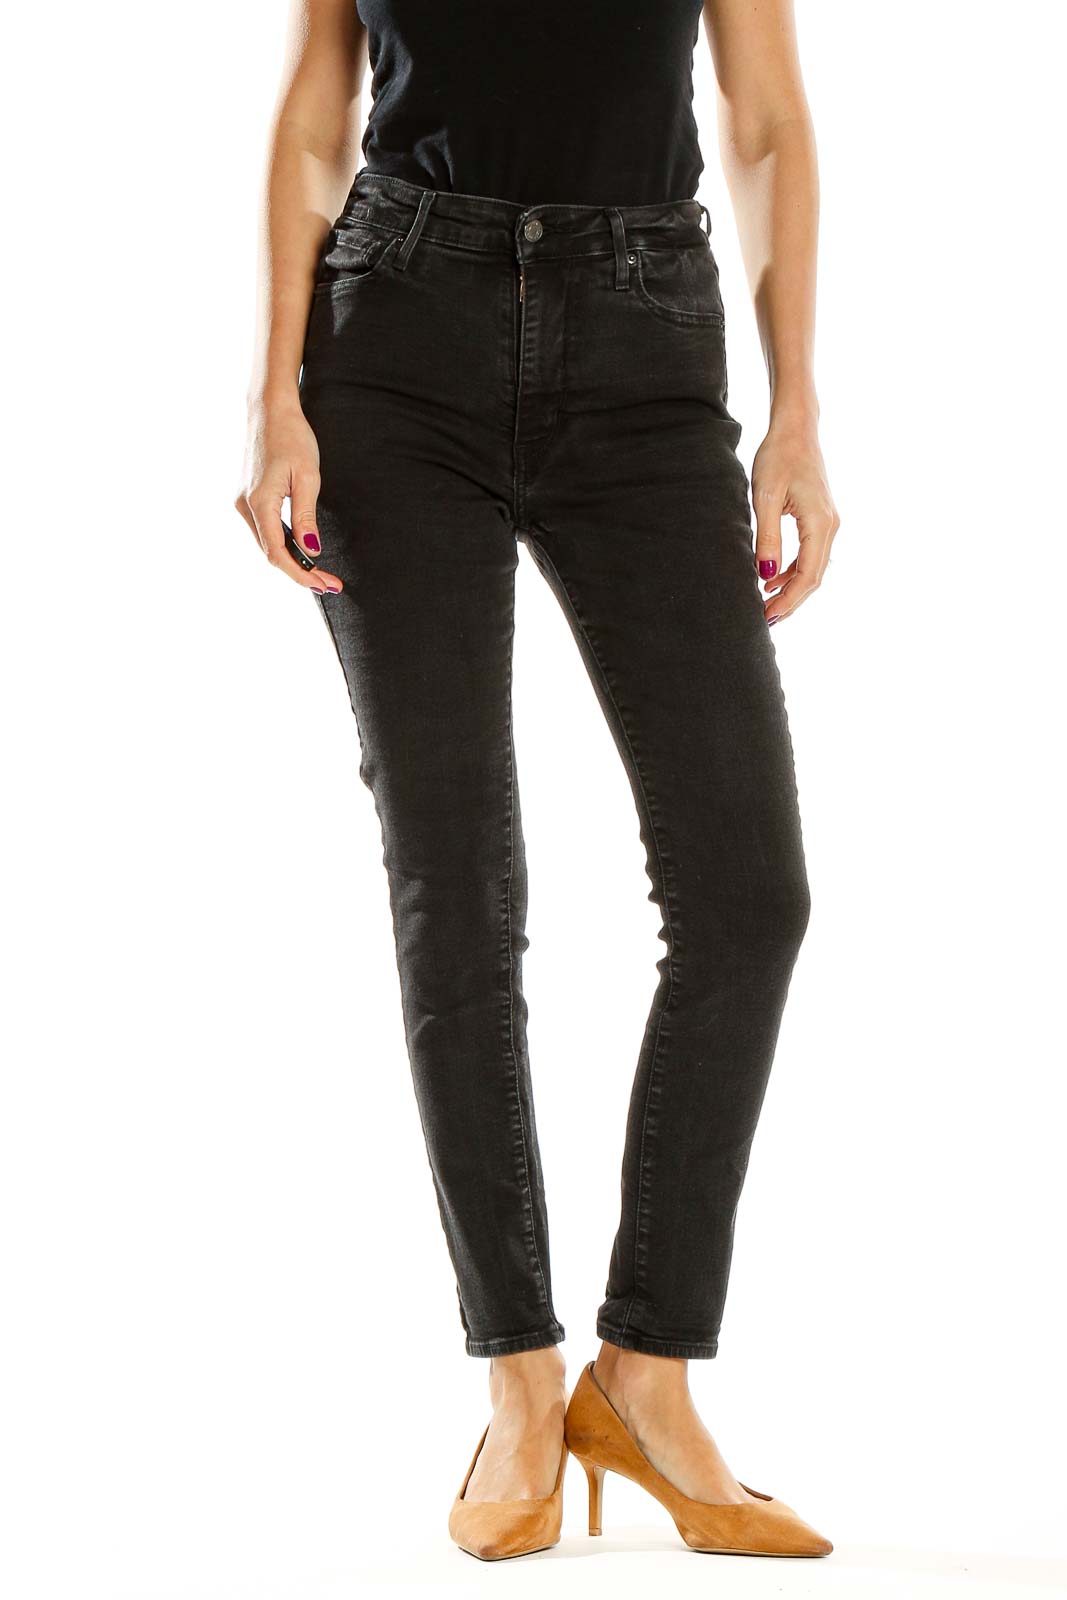 Black High Waisted Skinny Jeans Front